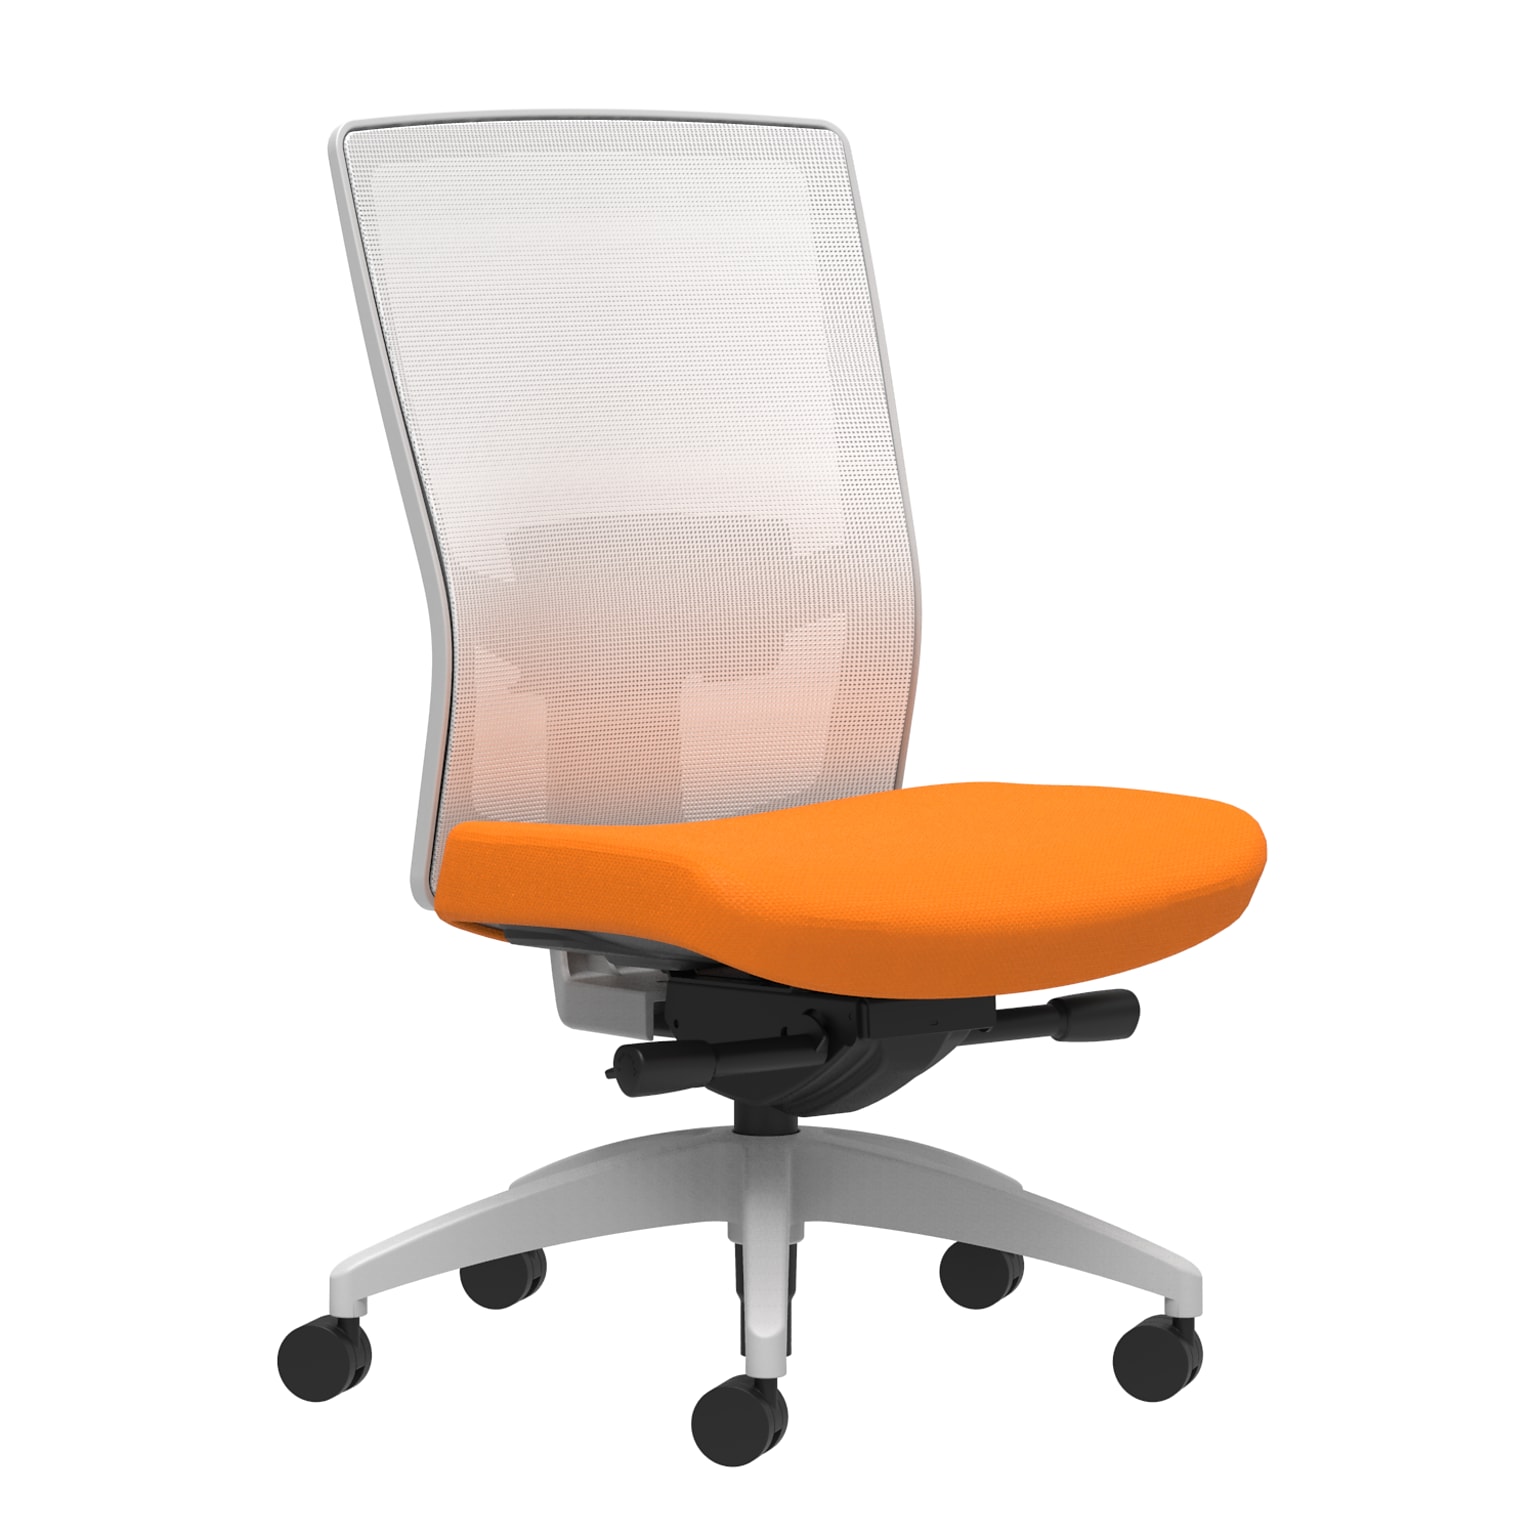 Union & Scale Workplace2.0™ Fabric Task Chair, Apricot, Adjustable Lumbar, Armless, Advanced Synchro-Tilt Seat Control (53557)